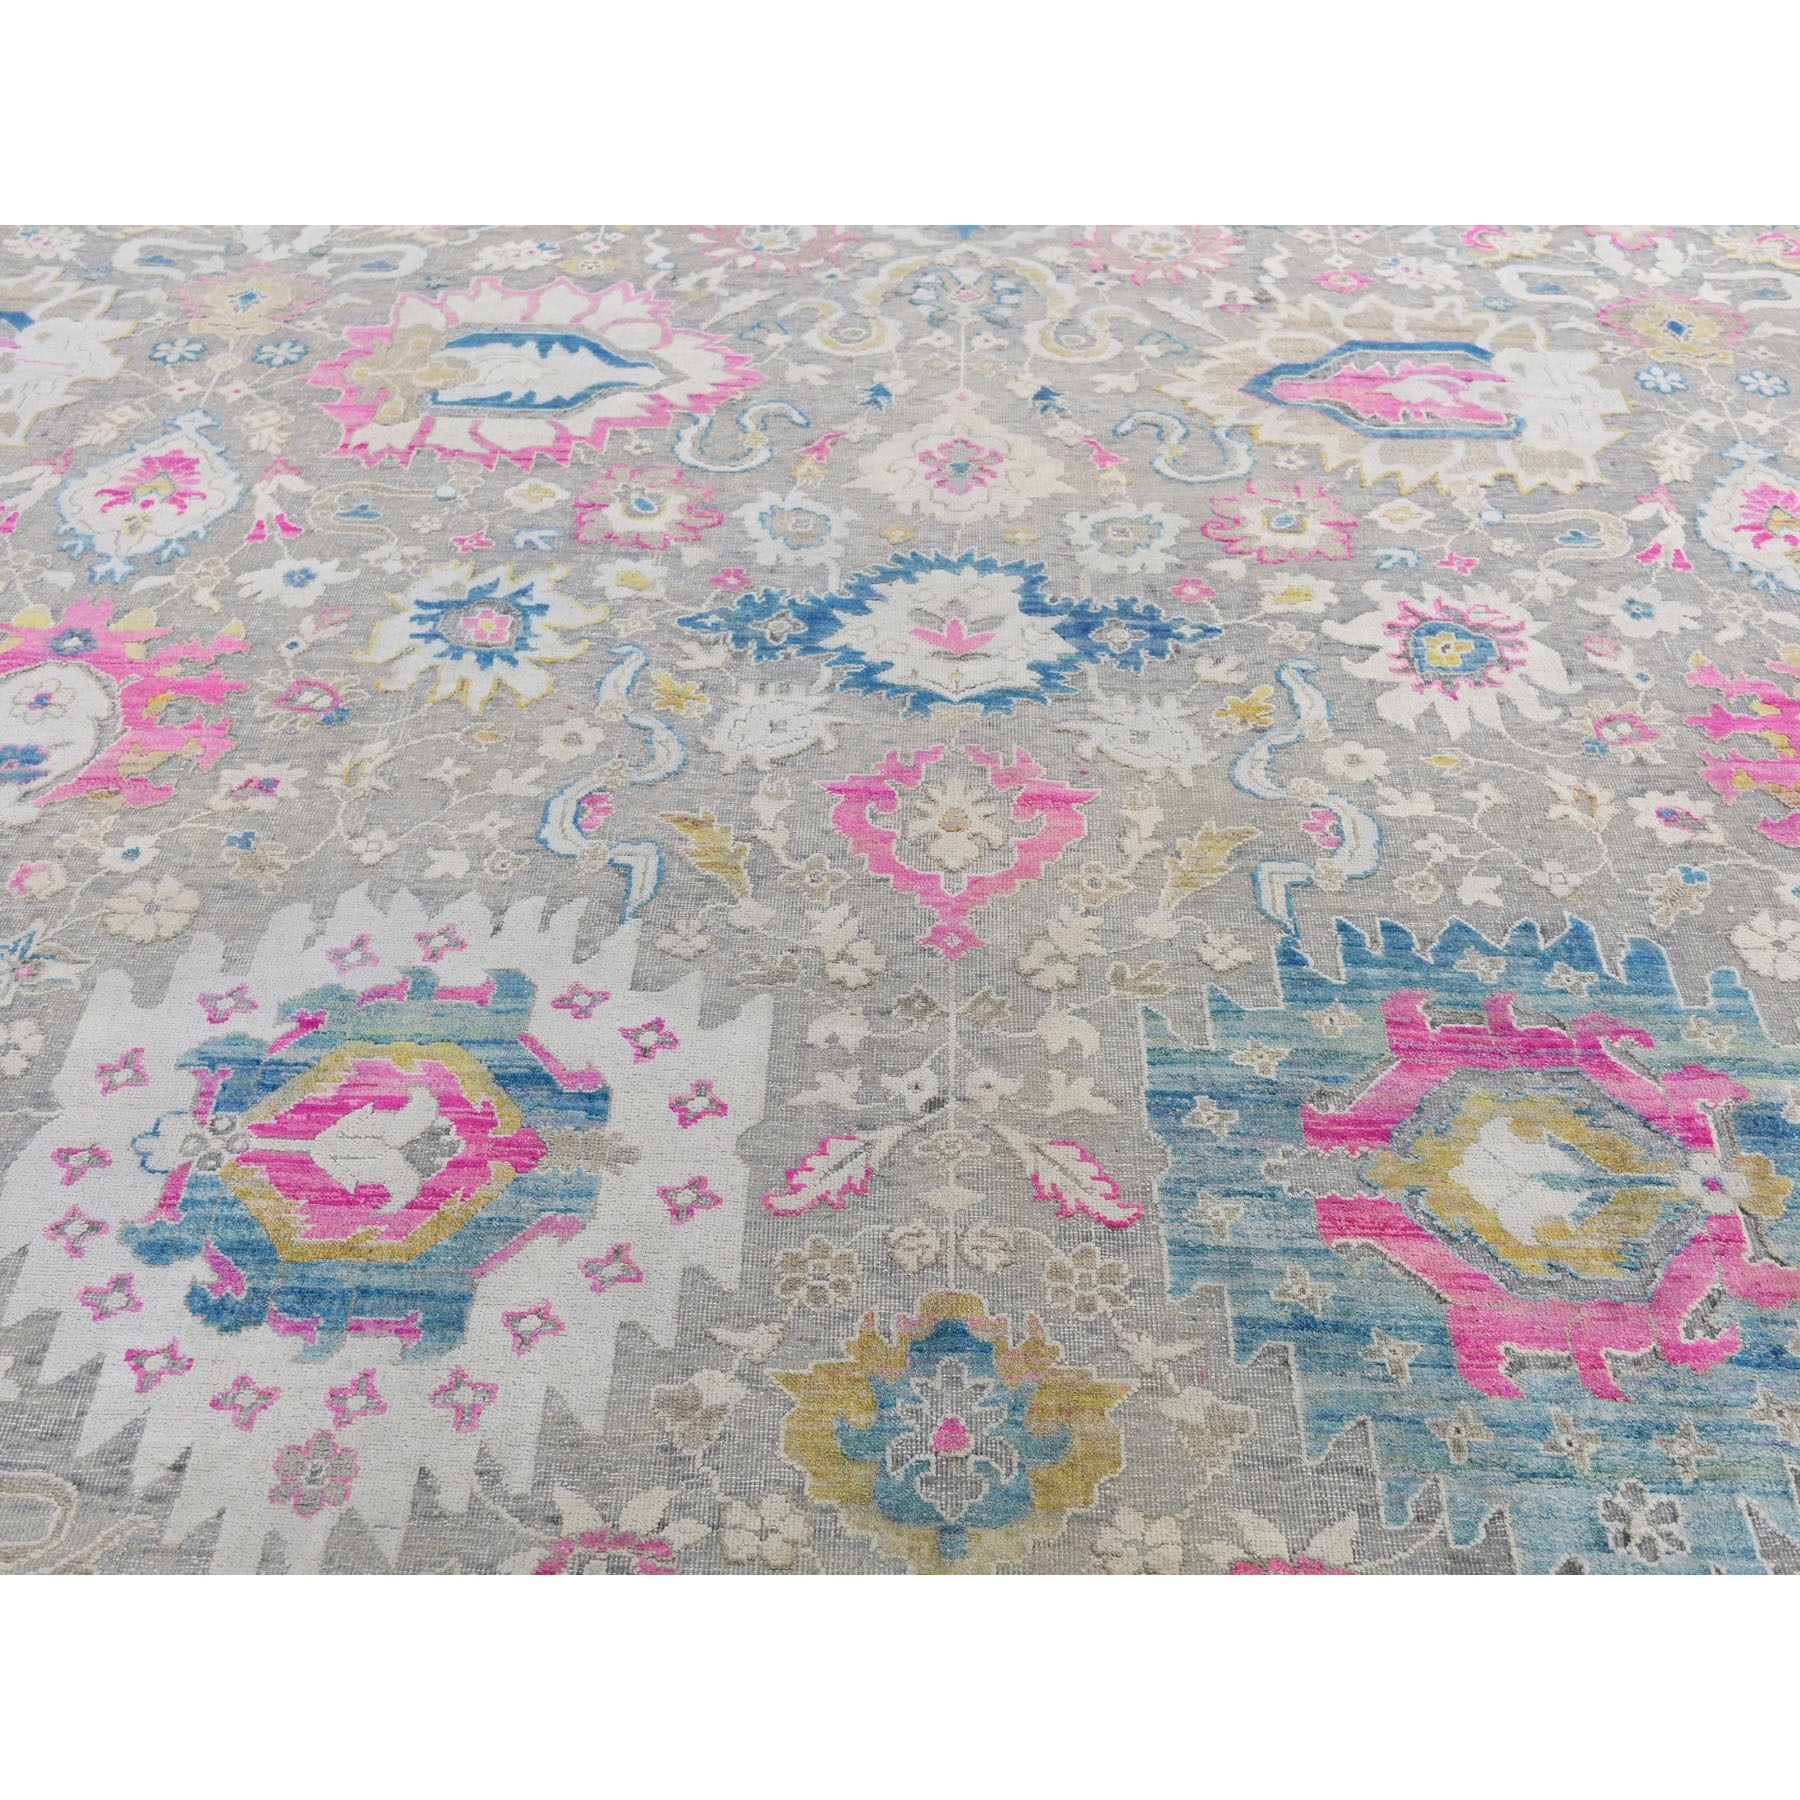 9-x12-1  Colorful Sari Silk With Textured Wool Hand Knotted Oushak Influence Rug 